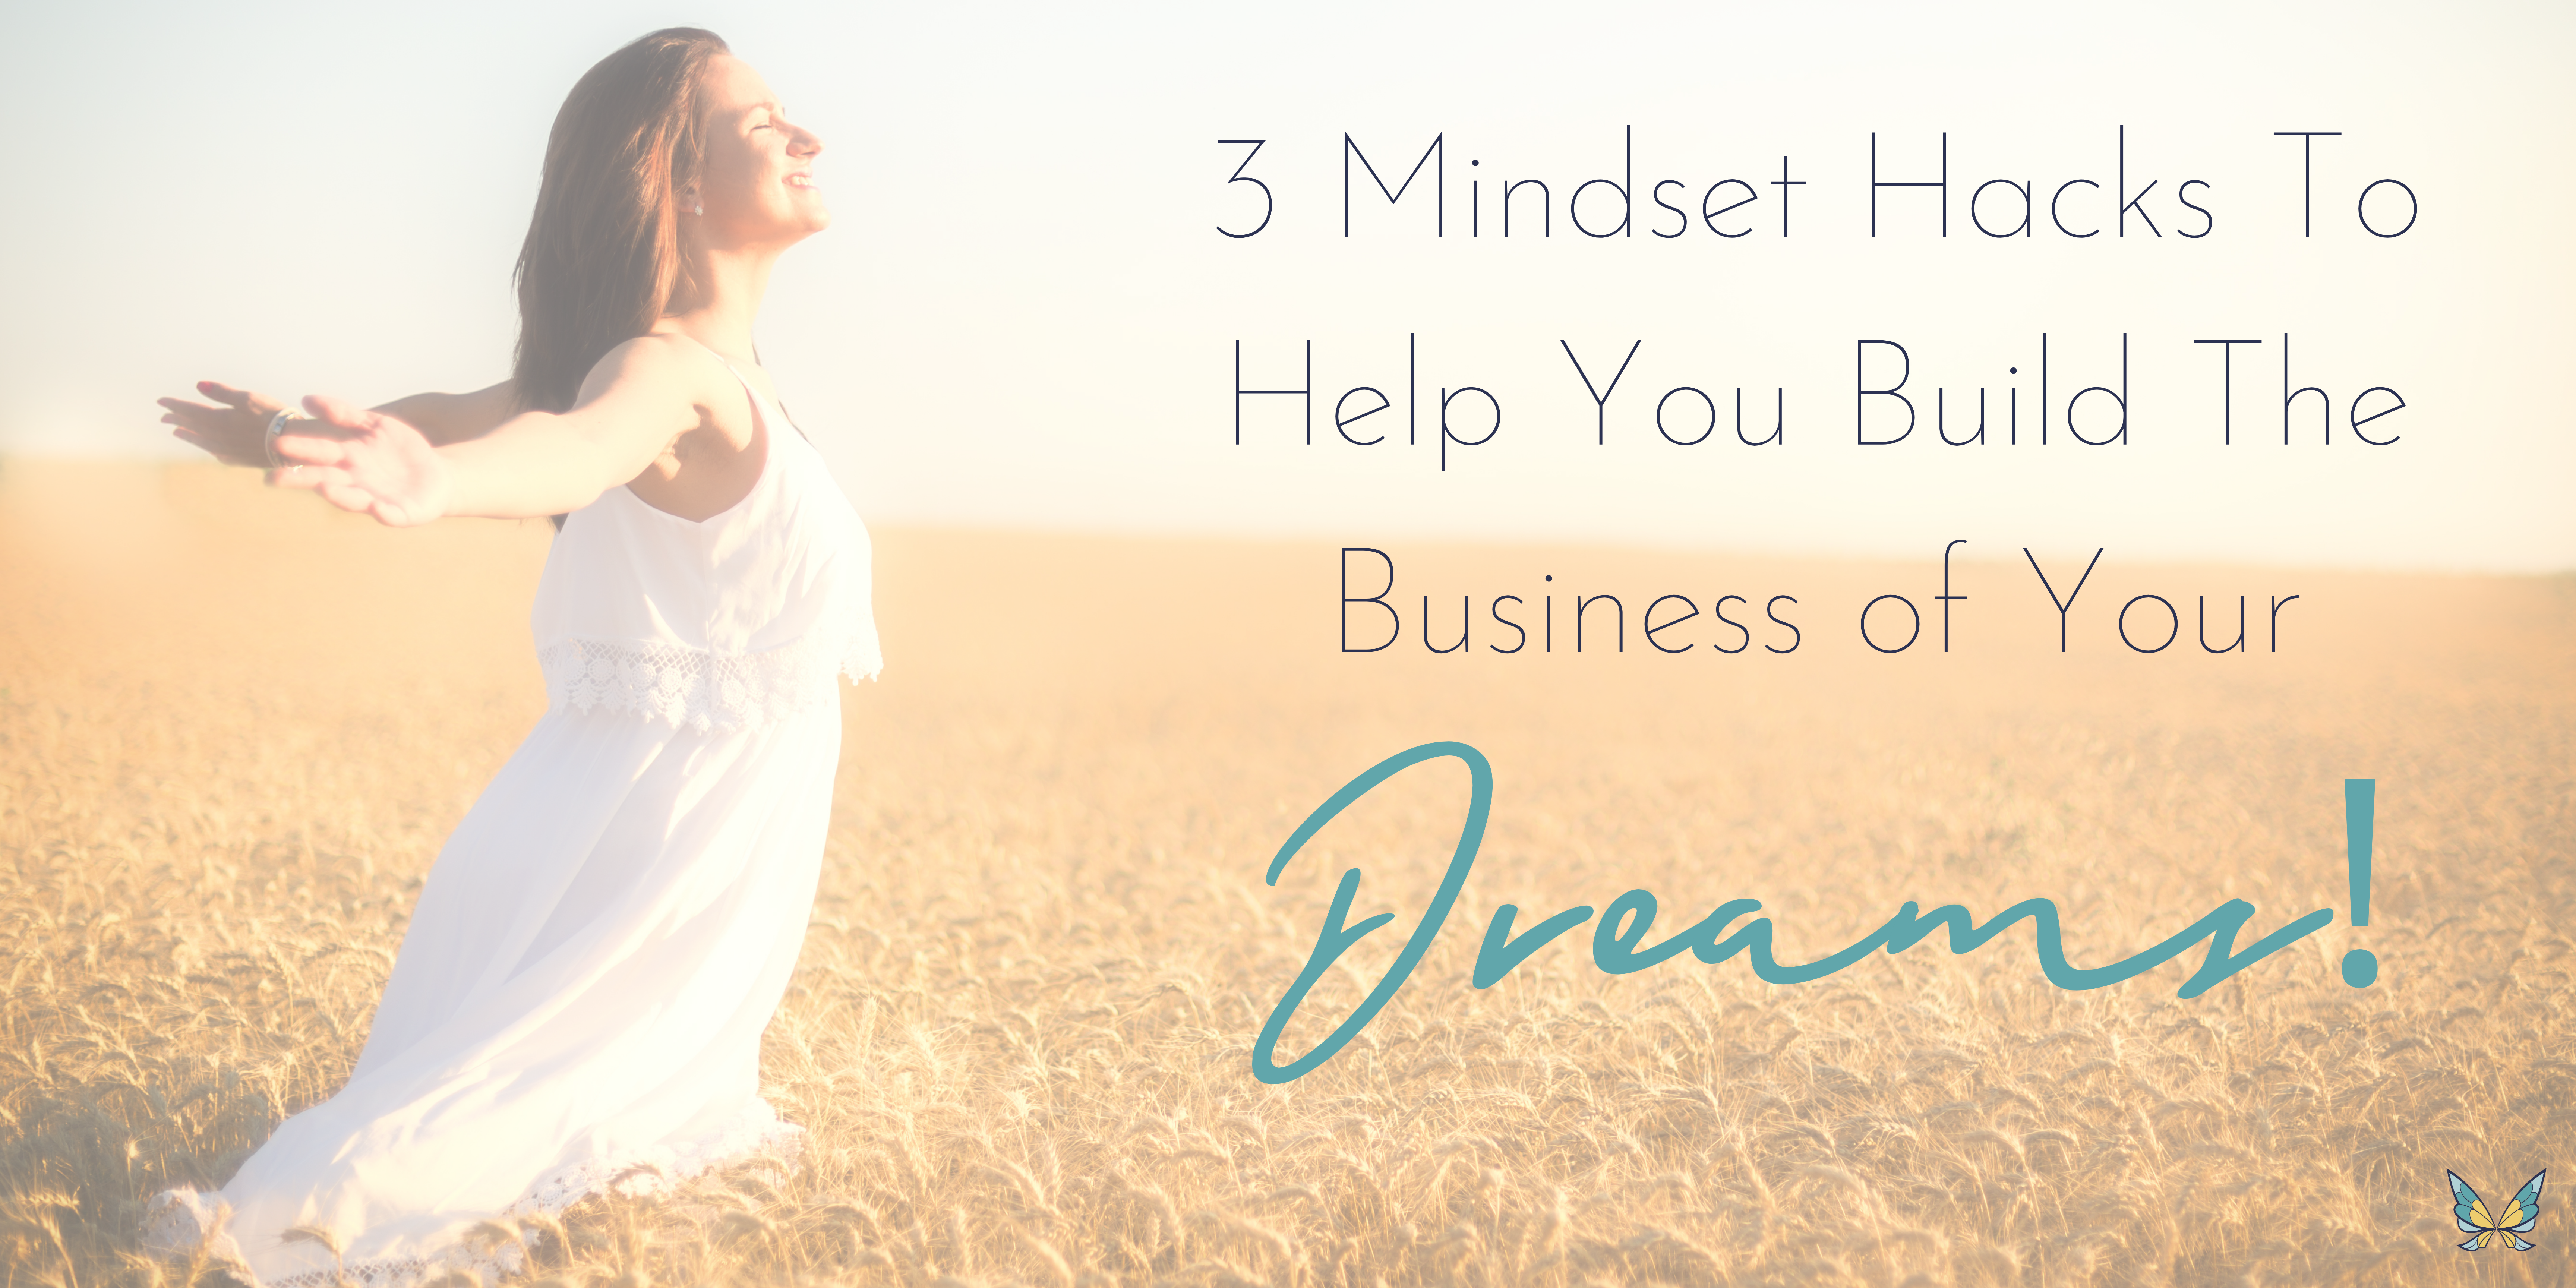 Build The Business of your dreams